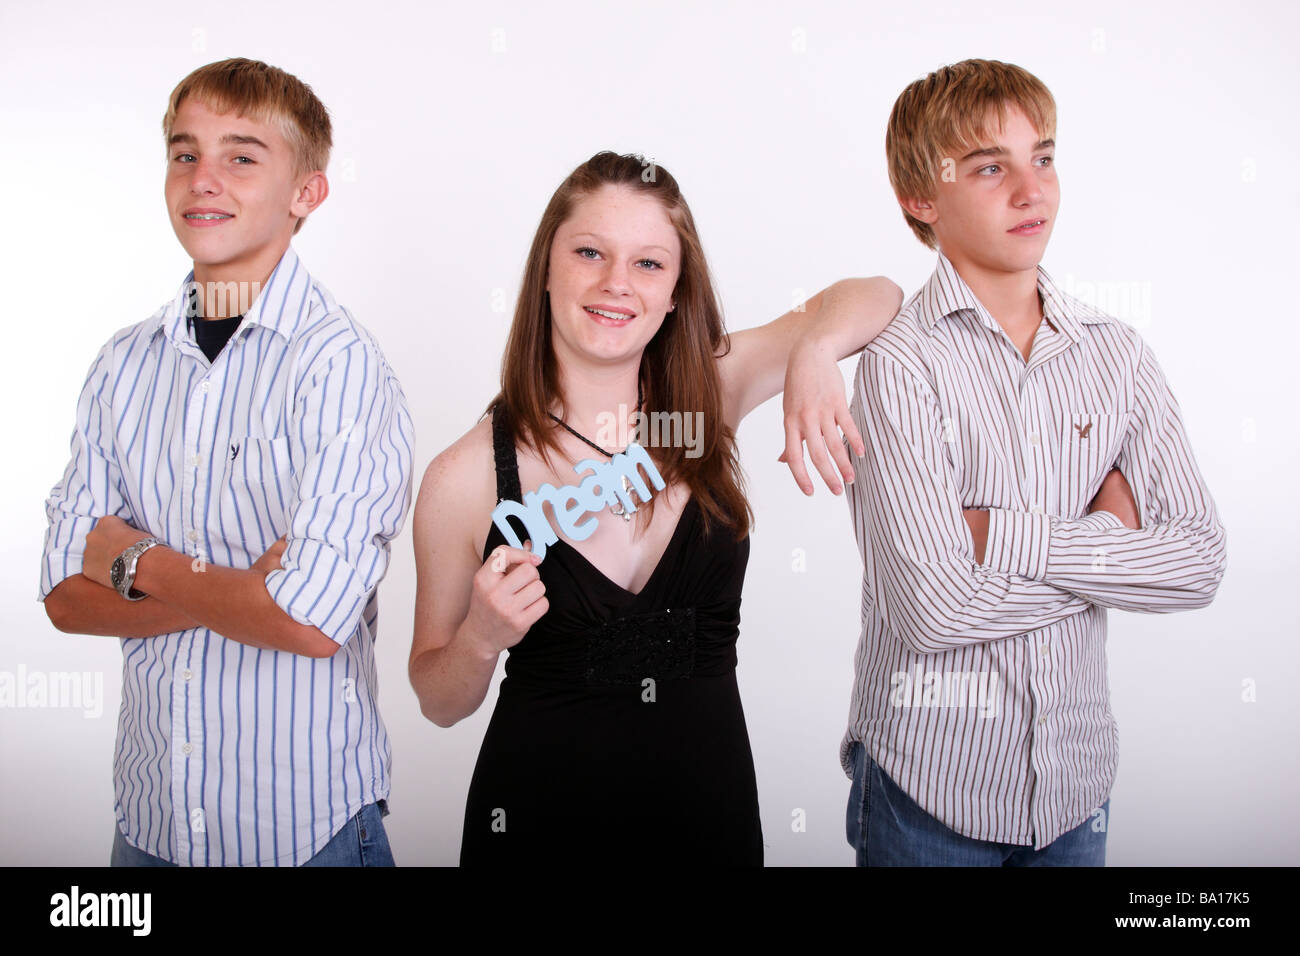 A Teen Girl Holding Onto The Word Dream With Twin Teen Boys On Either Side Stock Photo Alamy